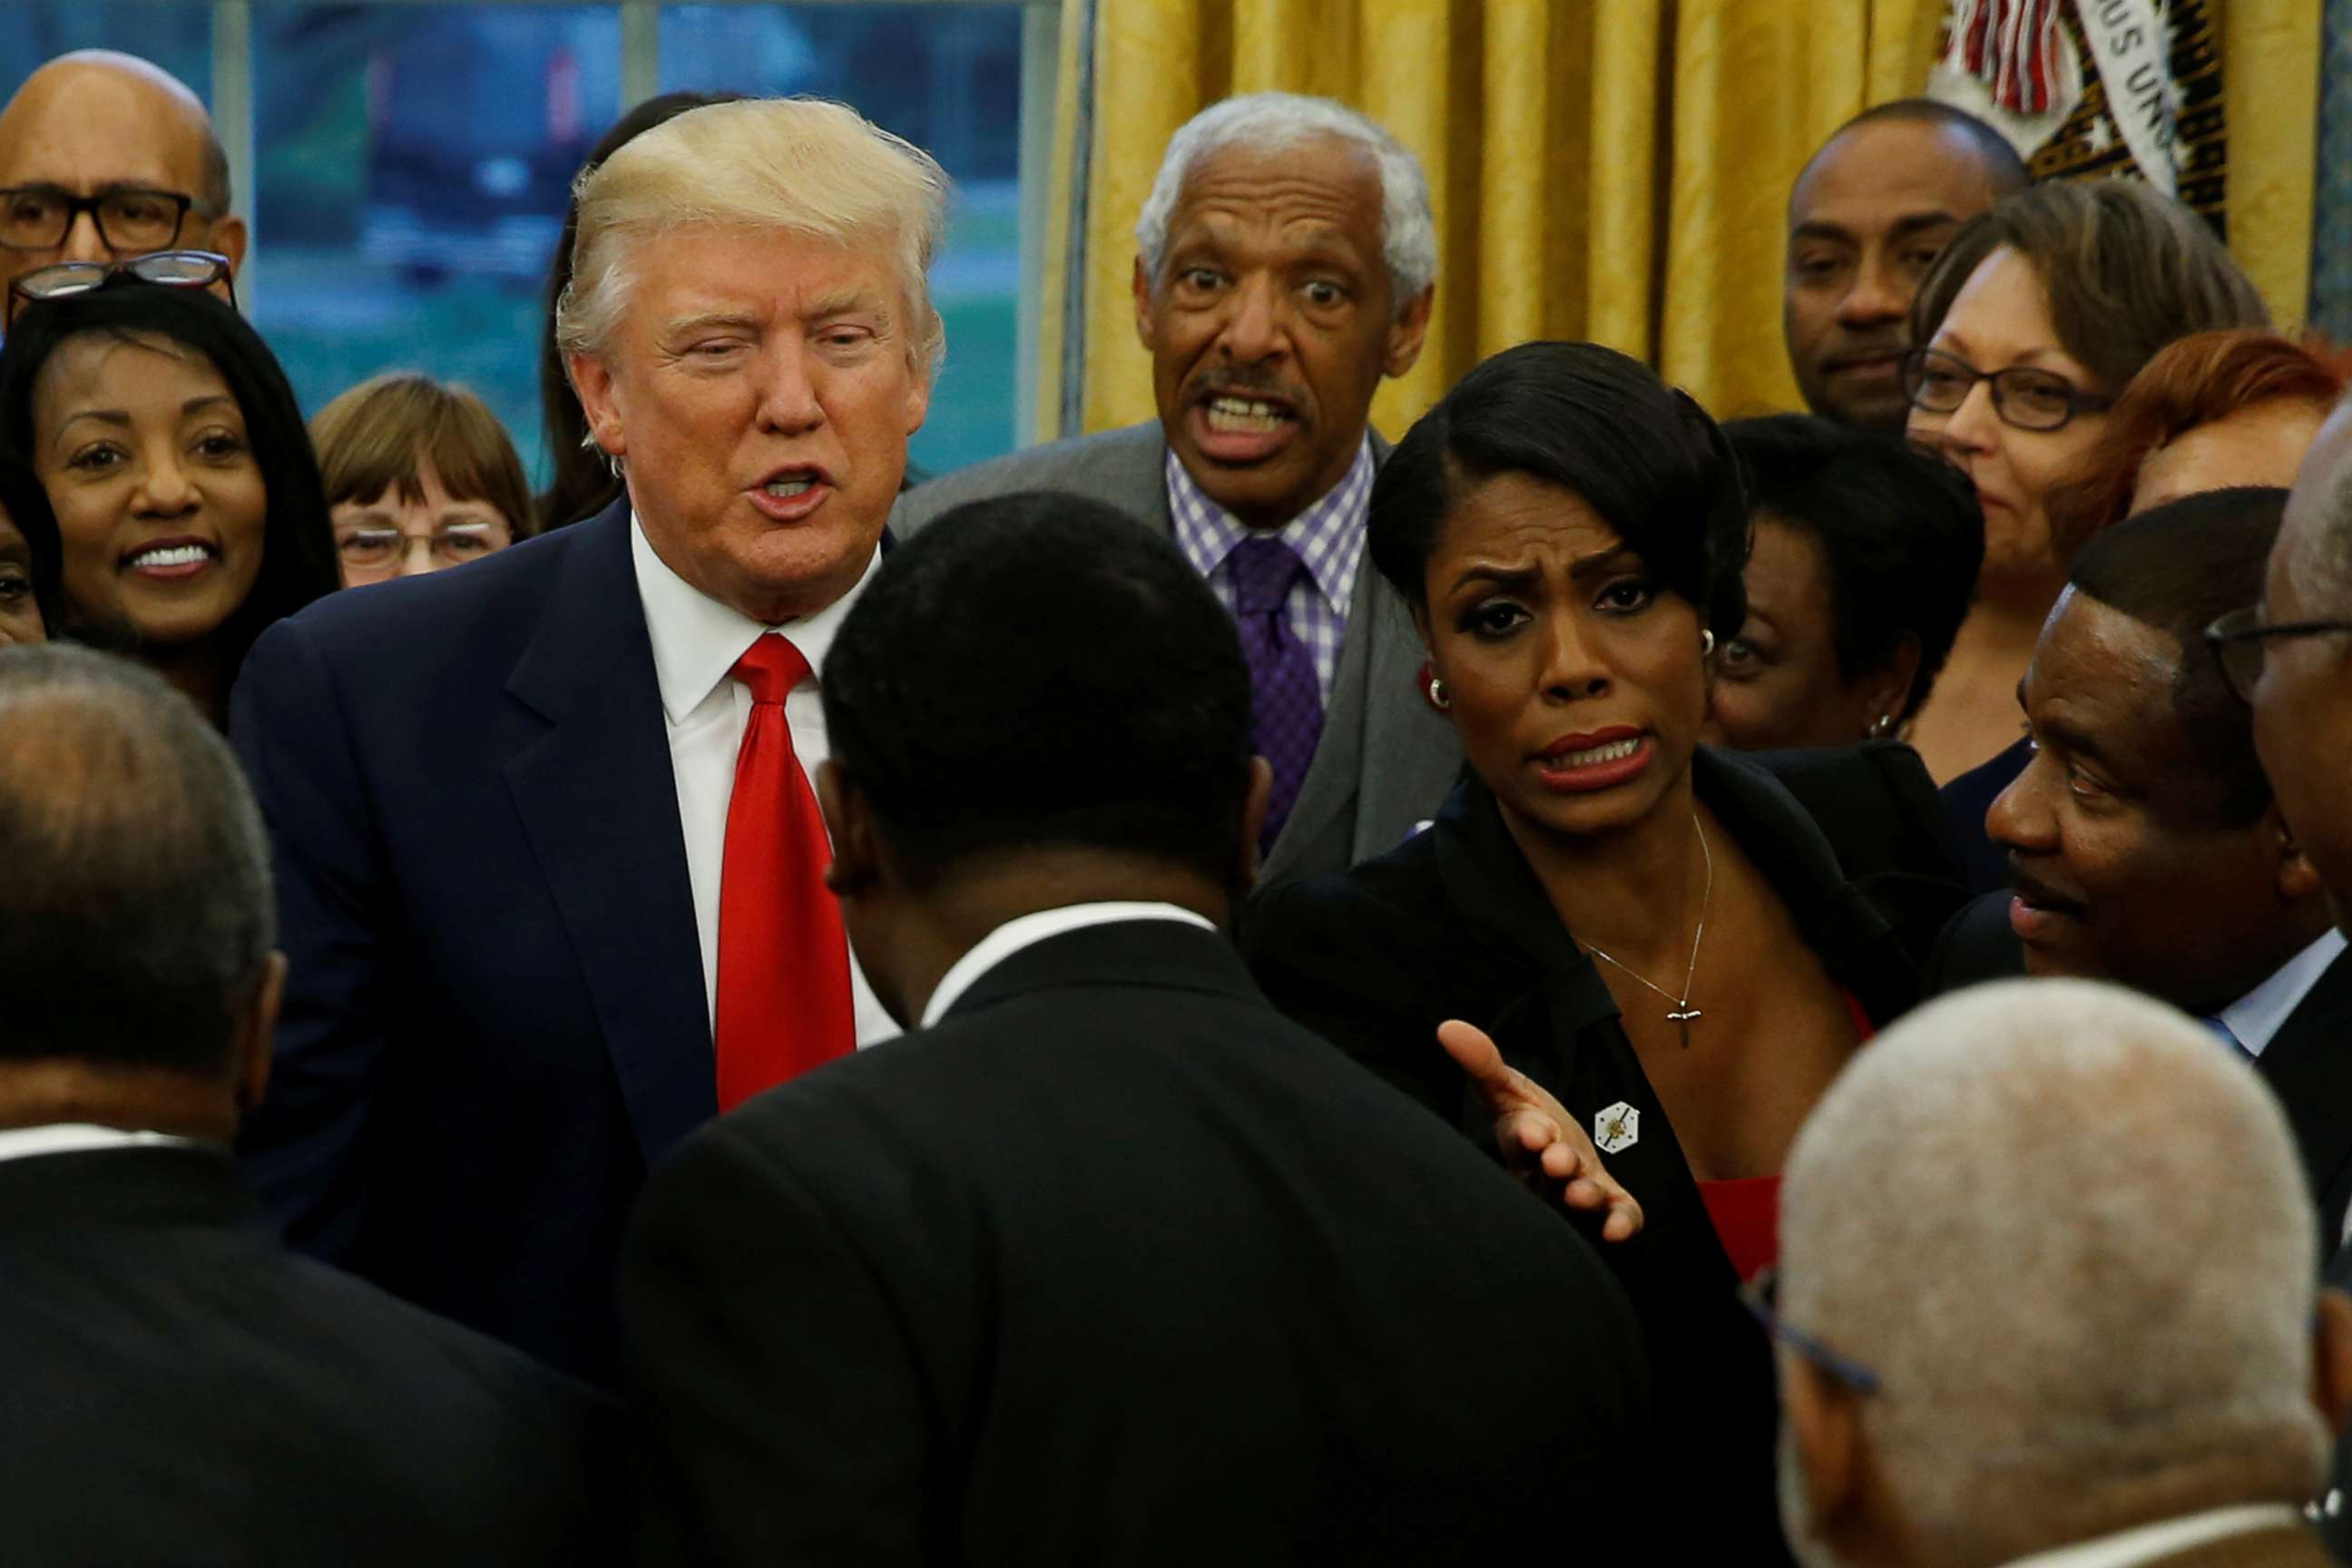 PHOTO: White House aide Omarosa Manigault (center R) and President Donald Trump (center L) with the leaders of dozens of historically black colleges and universities (HBCU) in the Oval Office at the White House in Washington, D.C., Feb. 27, 2017.